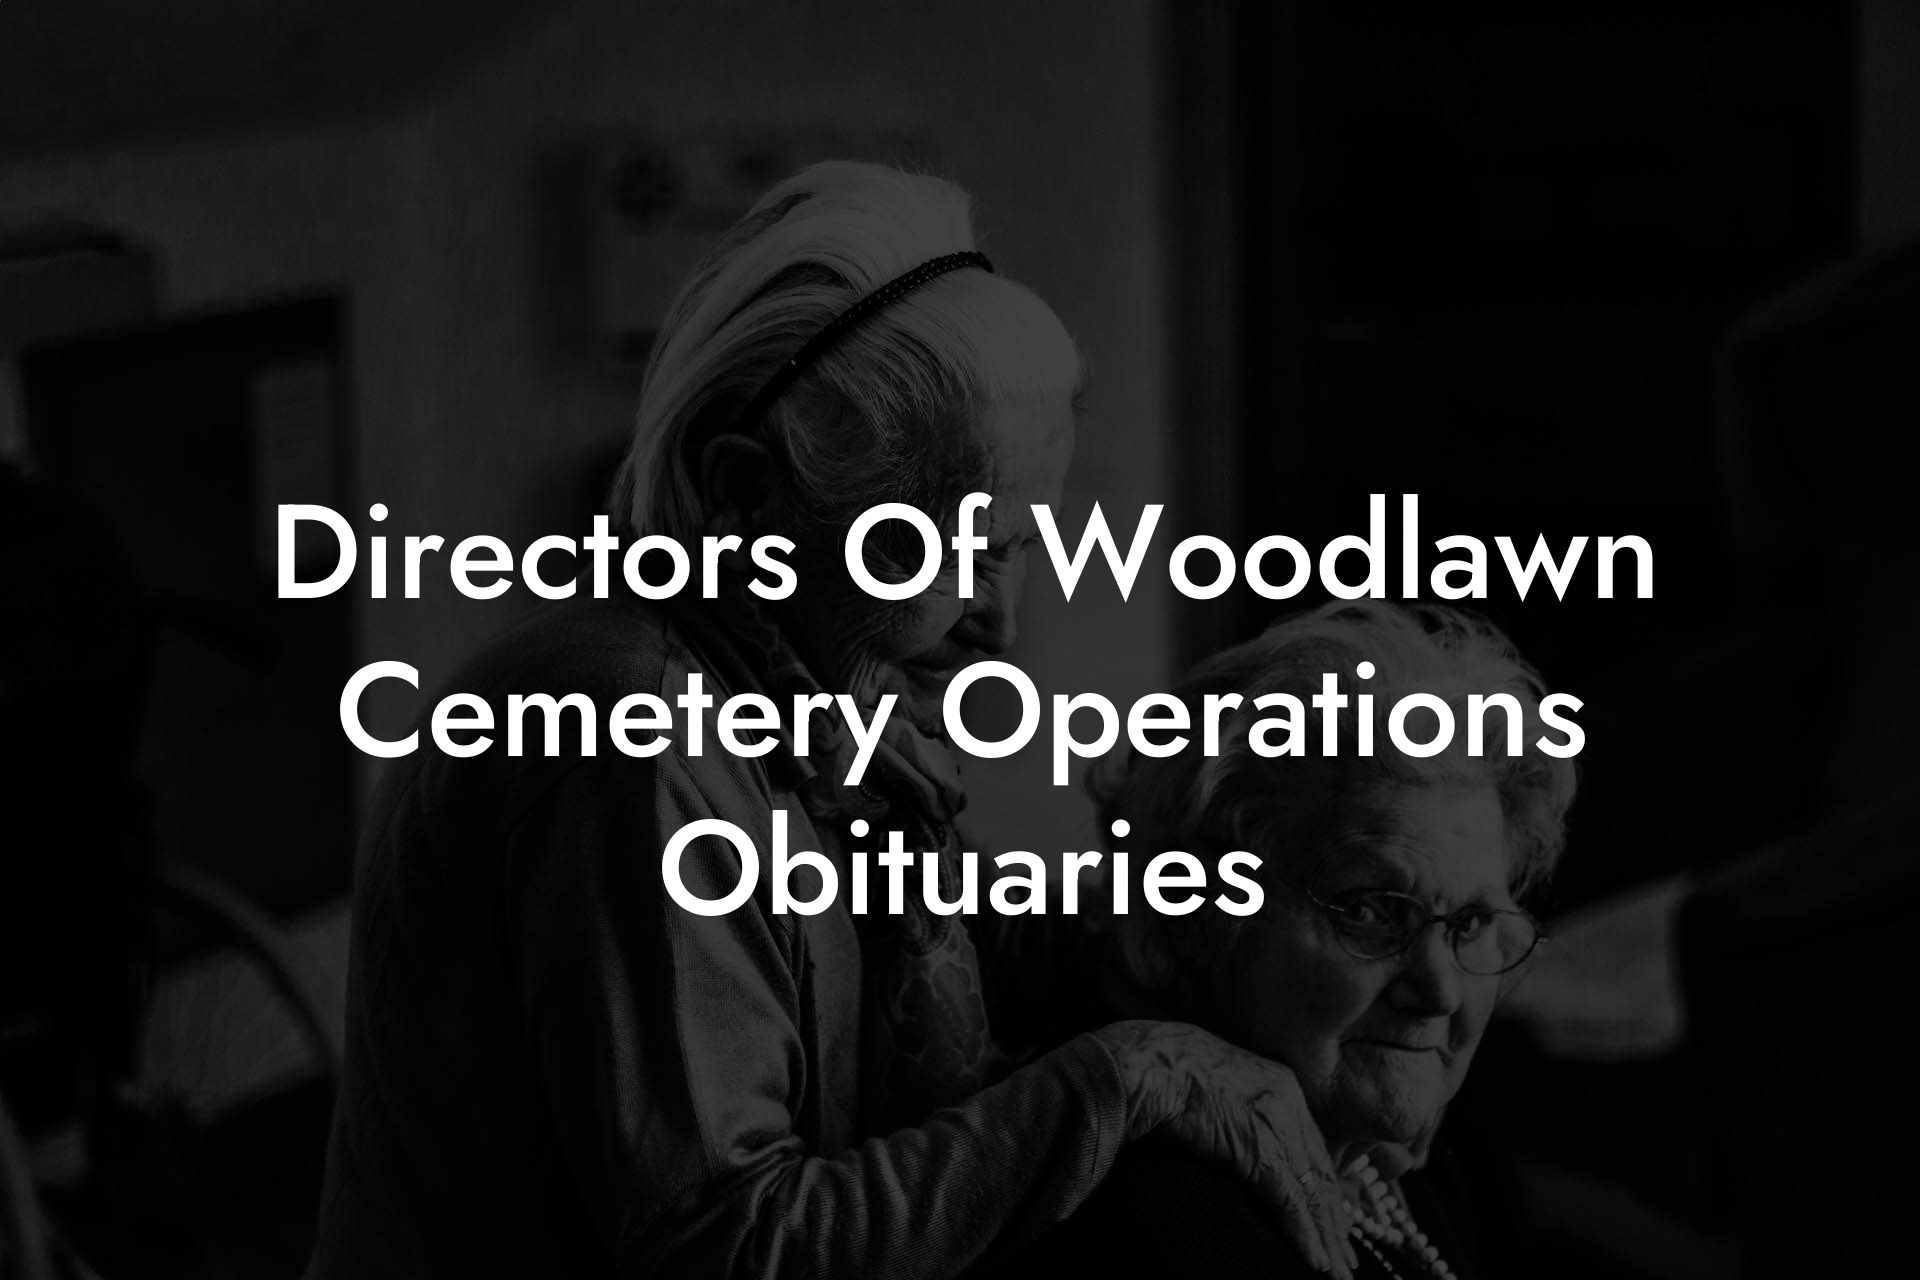 Directors Of Woodlawn Cemetery Operations Obituaries